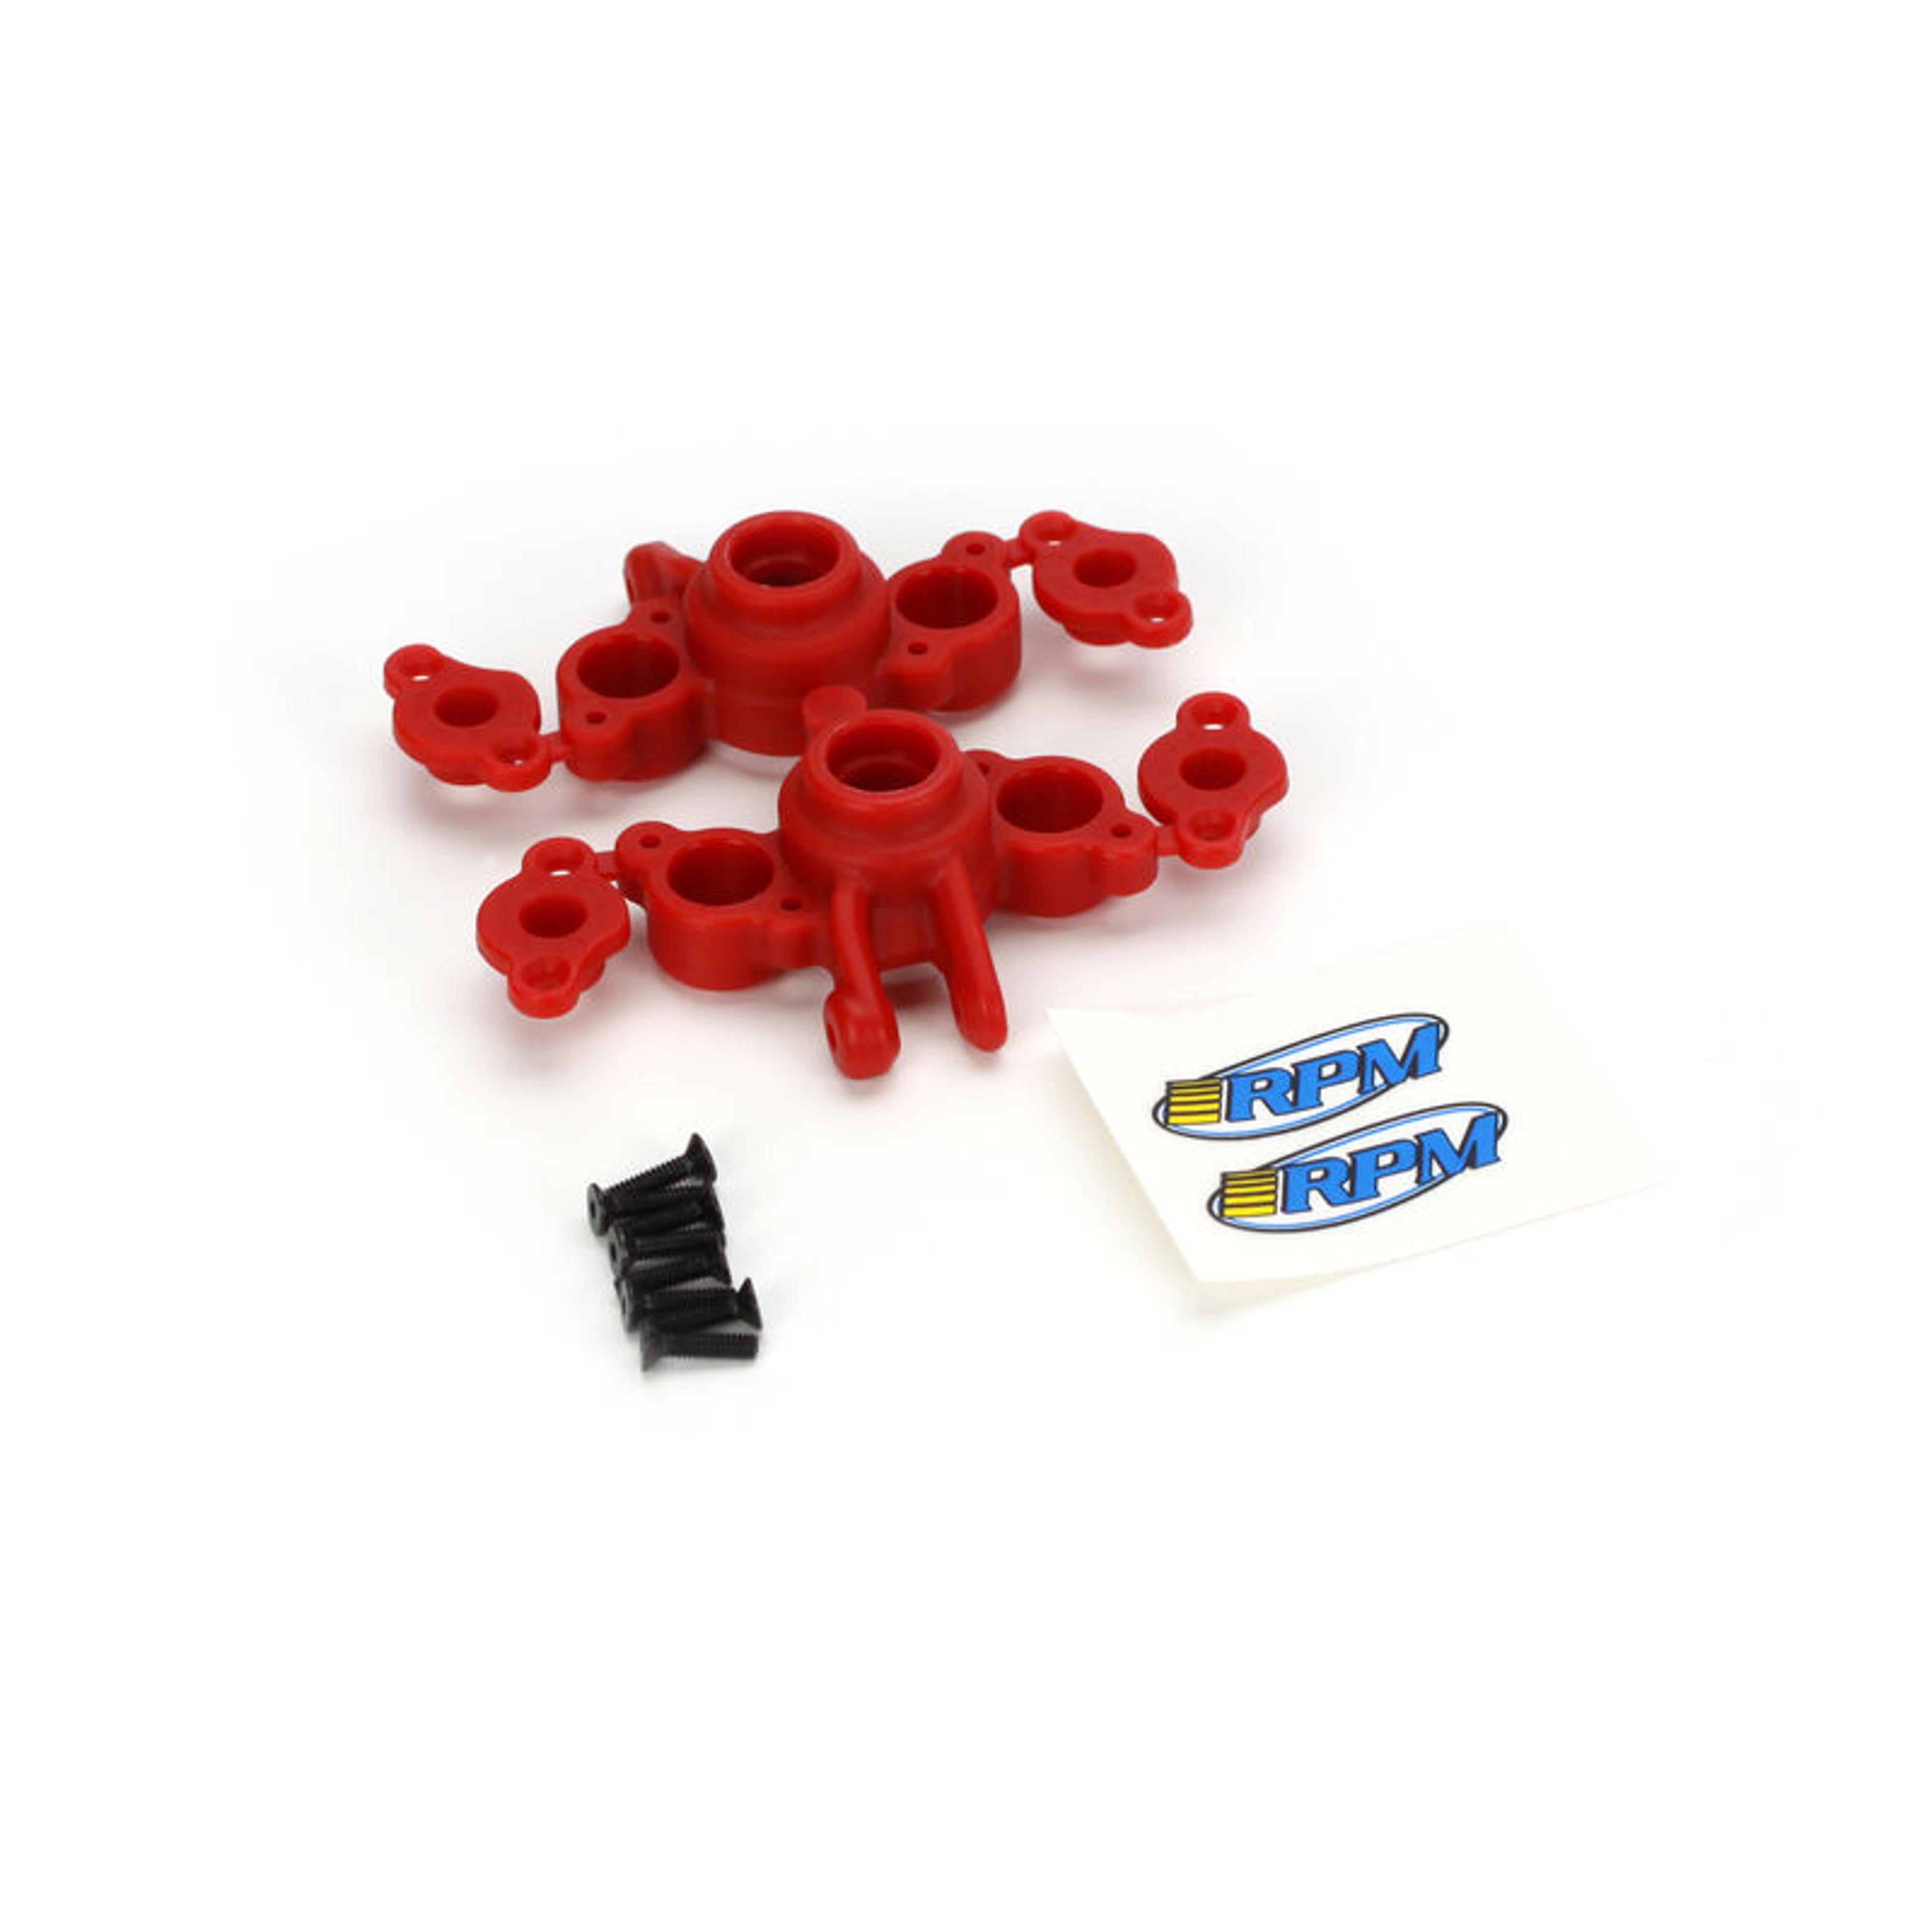 RPM Axle Carriers ERV/SLH (Red)